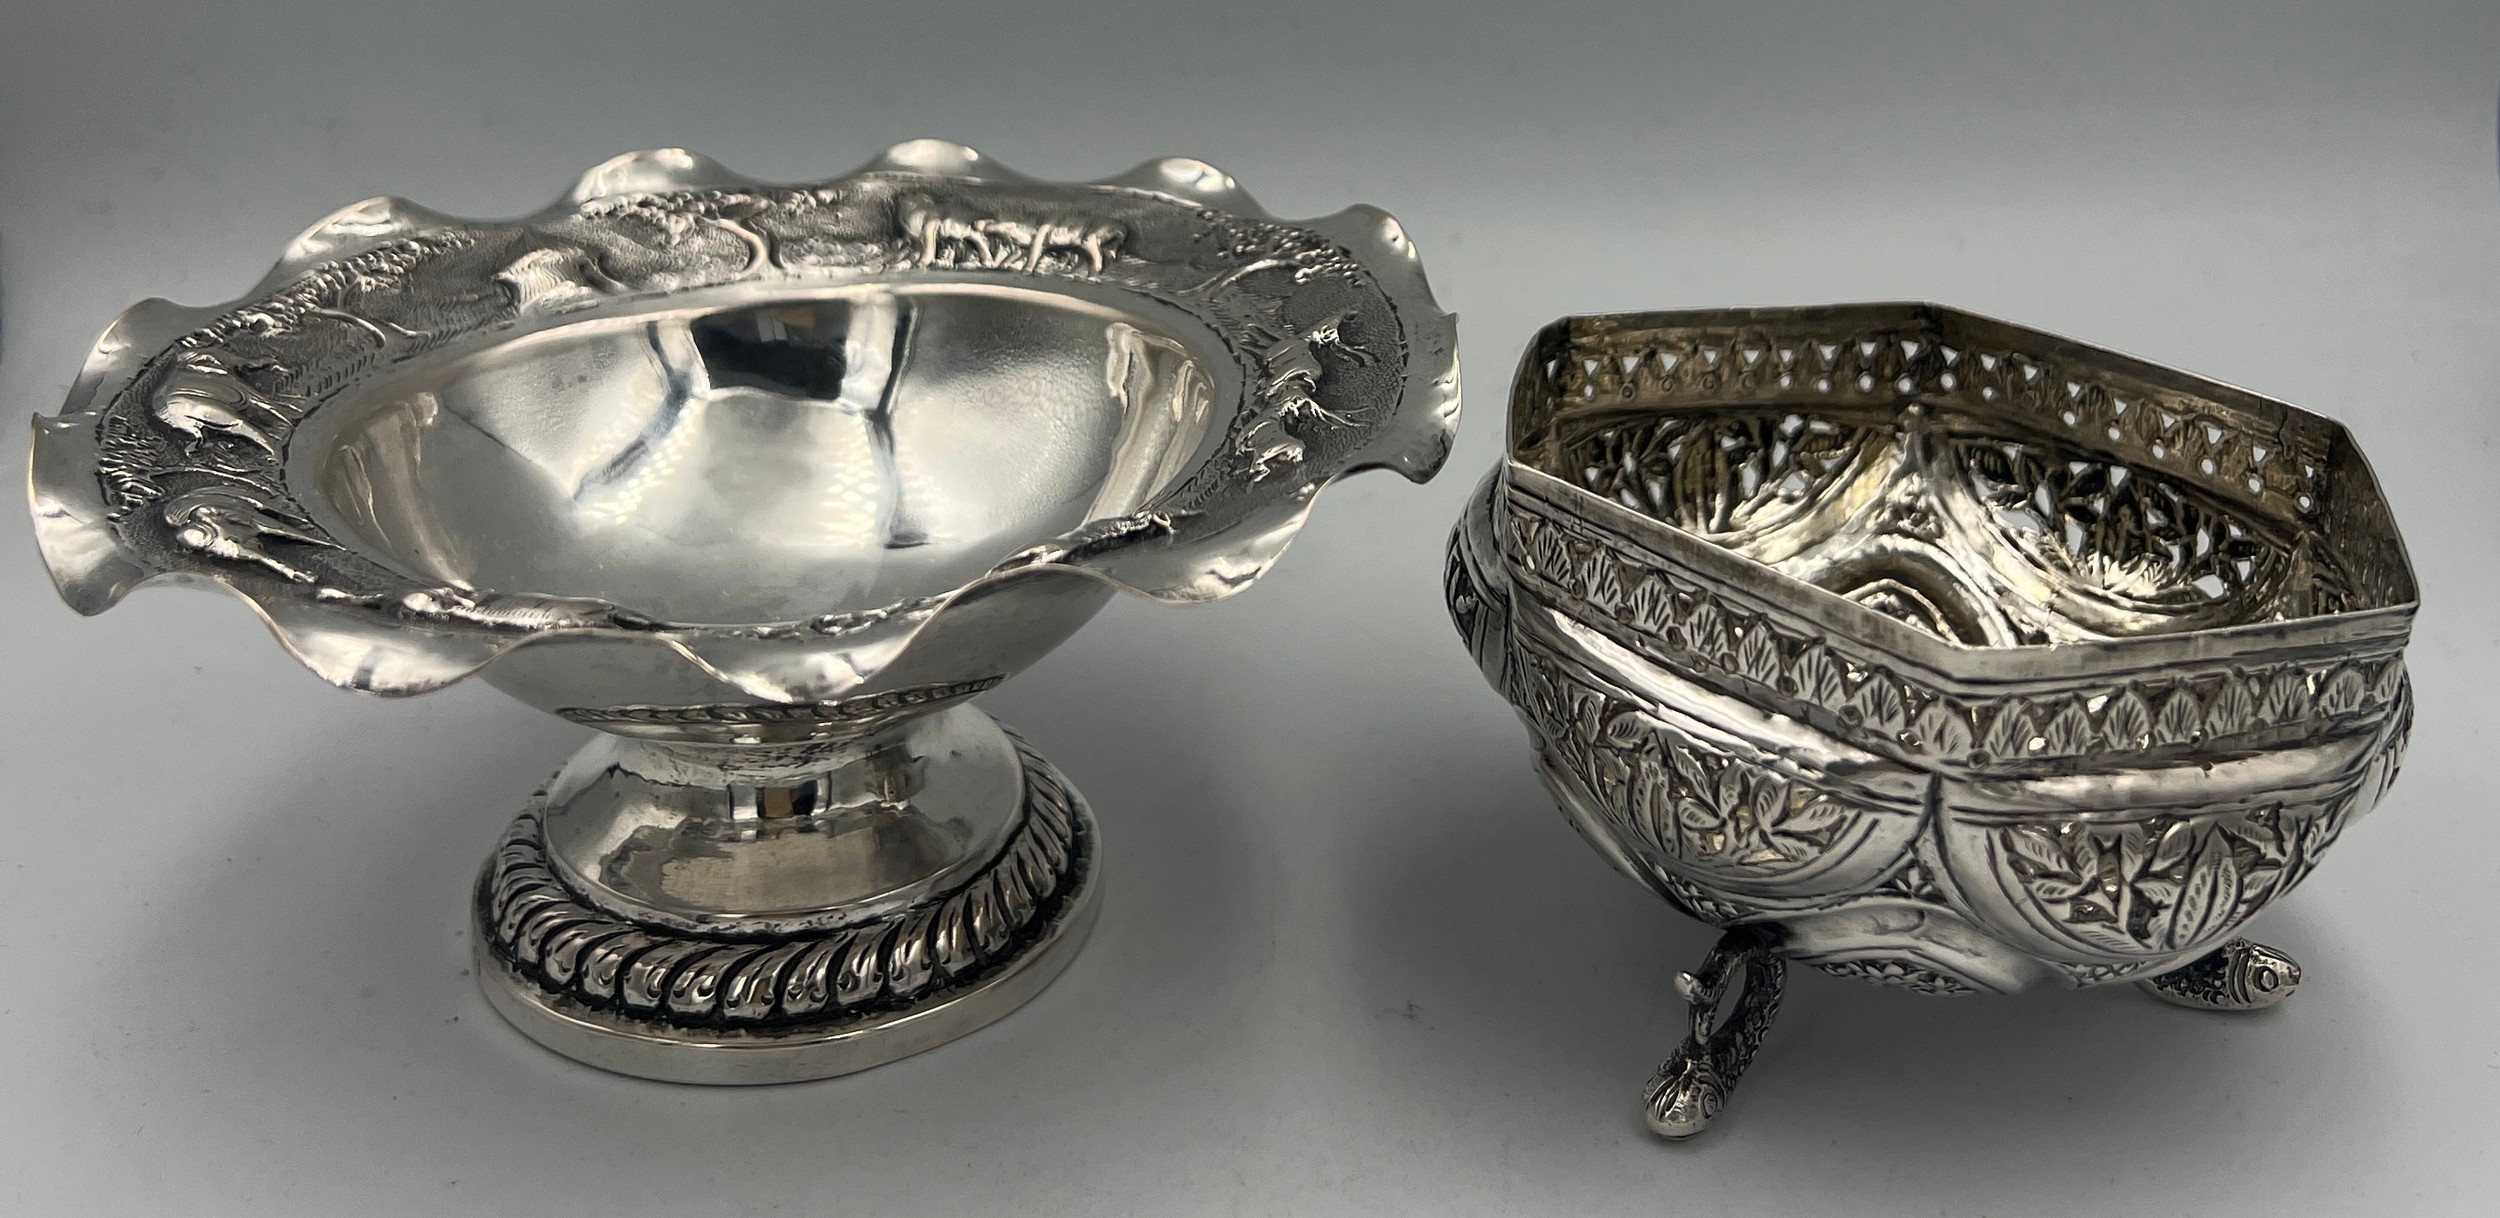 Two Indian white metal bowls, one on a pedestal and embossed with elephants and other animals, the